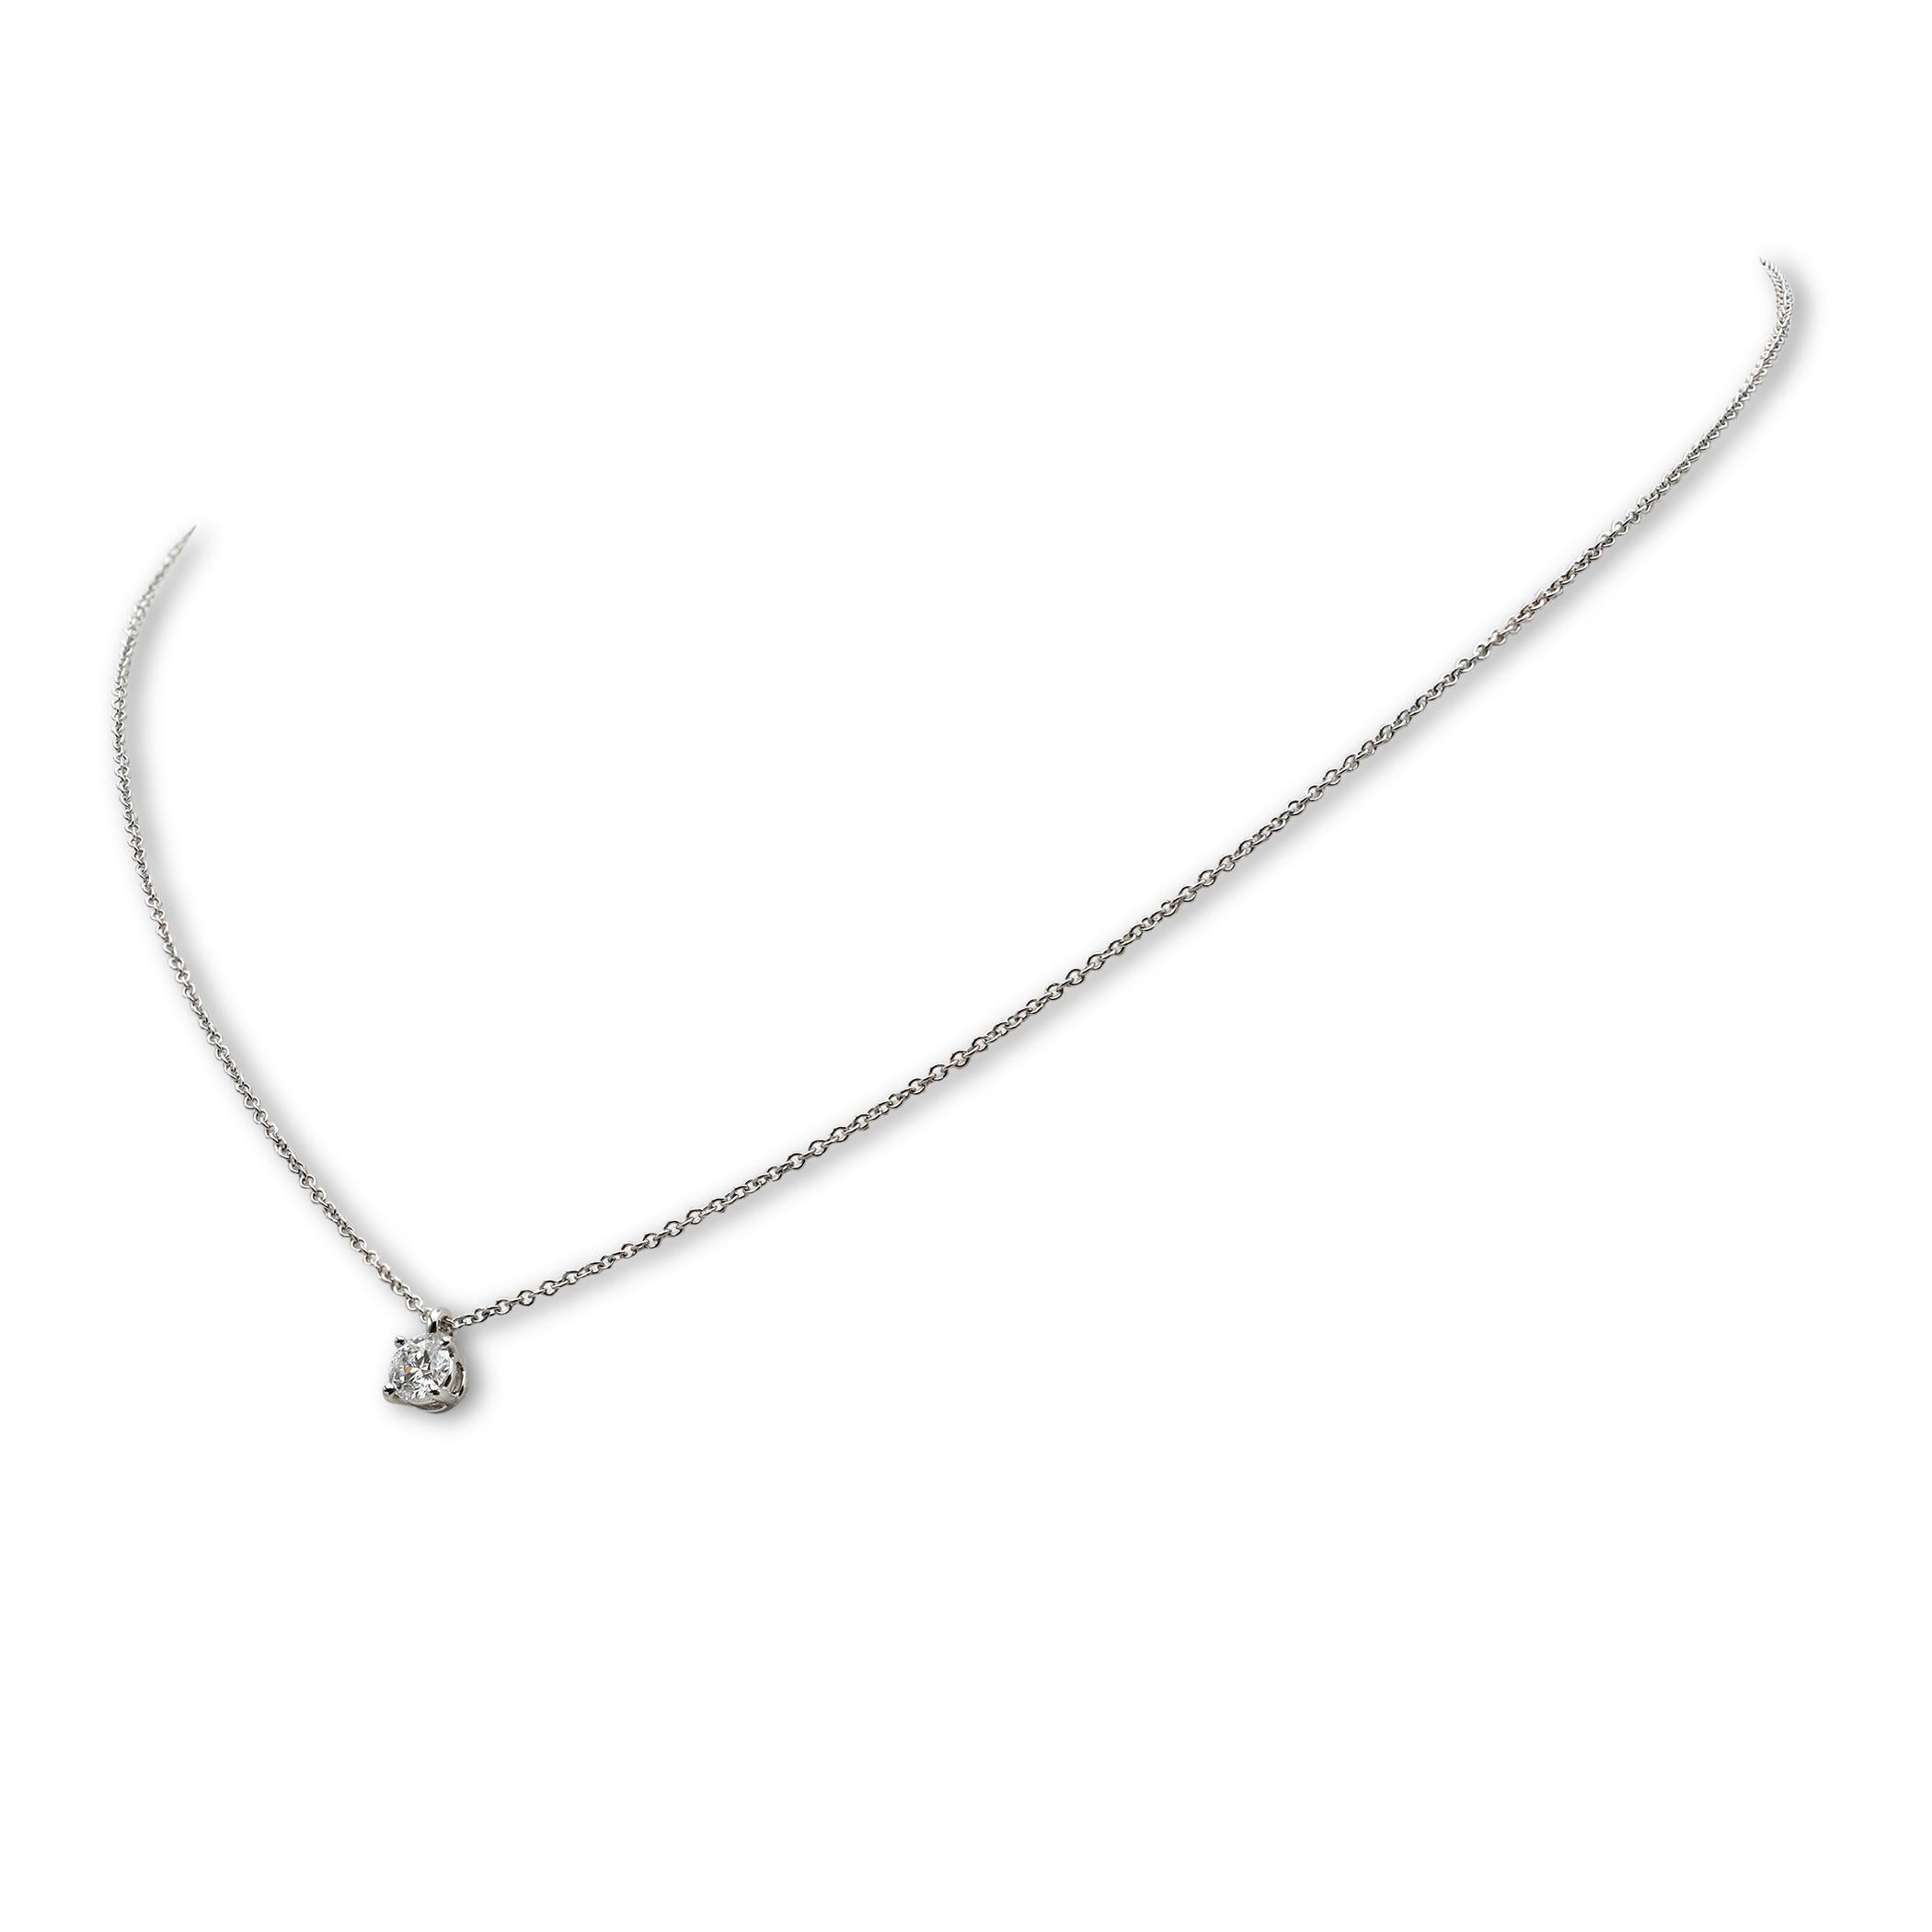 Authentic Tiffany & Co. Necklace crafted in platinum and featuring a round brilliant cut solitaire diamond pendant weighing approximately 0.26 ct, F-G color, VS clarity. The delicate platinum chain measures 16 inches in length. Signed Tiffany & Co,